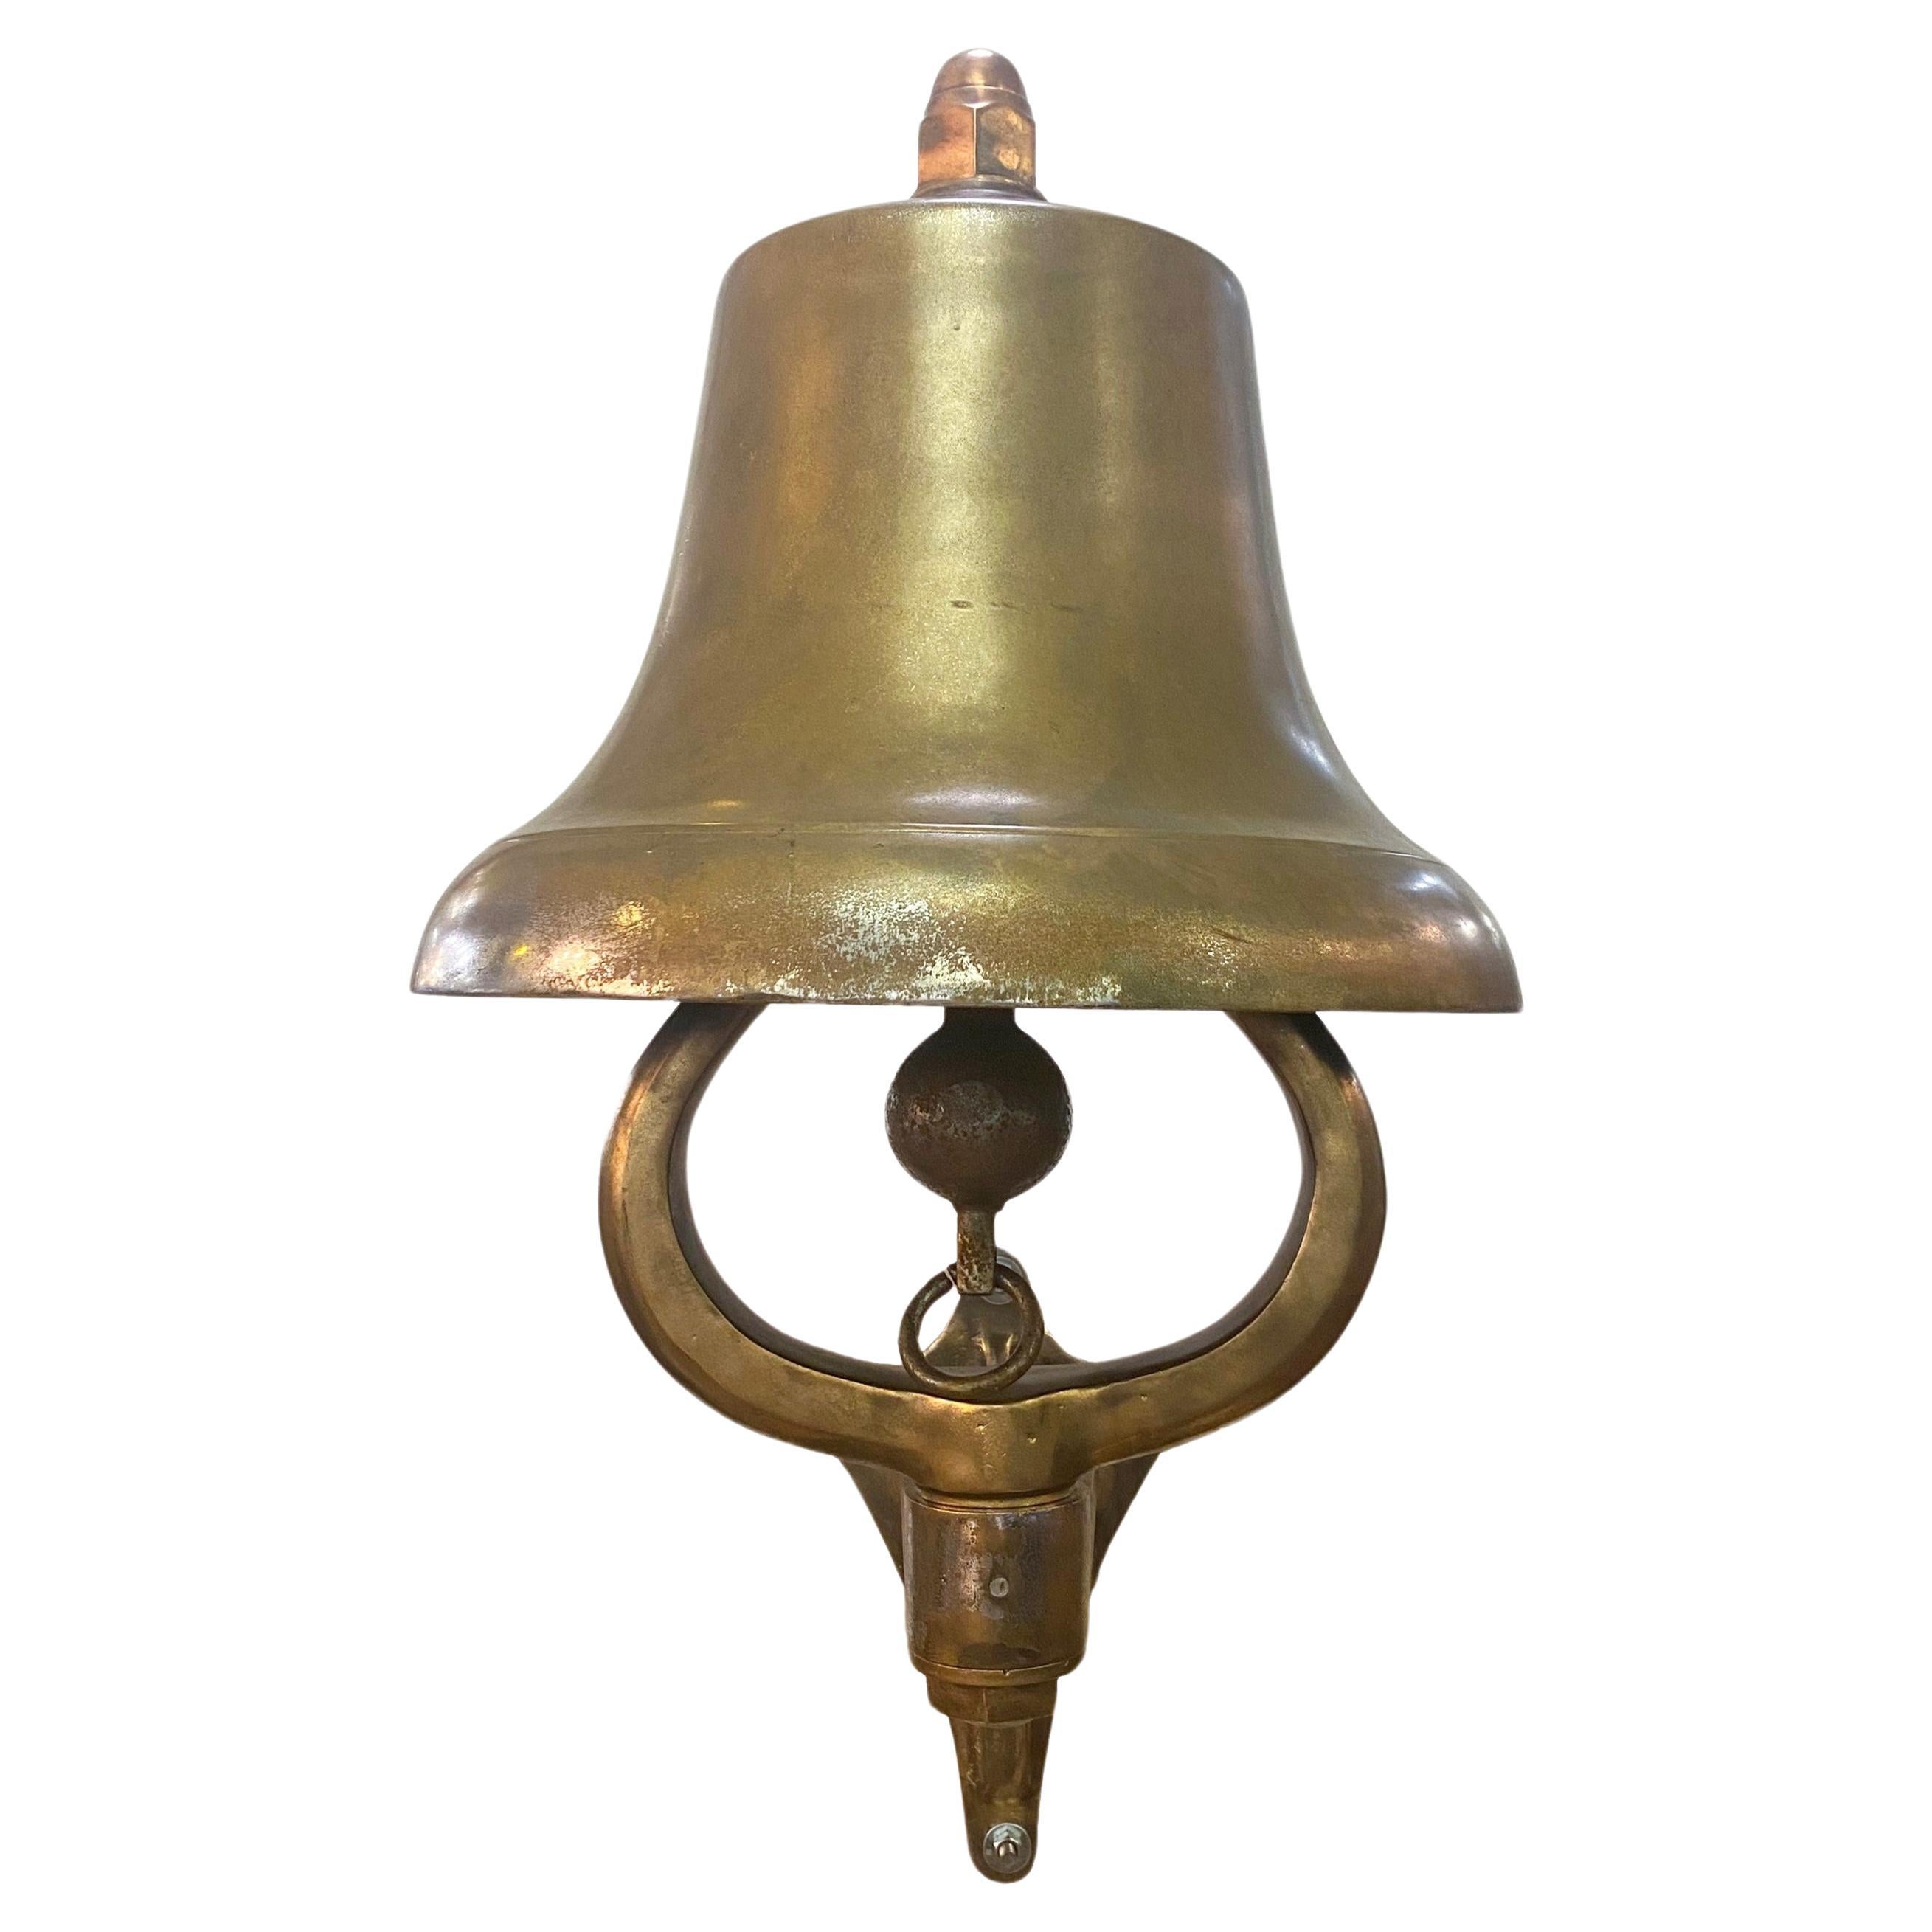 Antiques: Seafaring bells make great collectibles